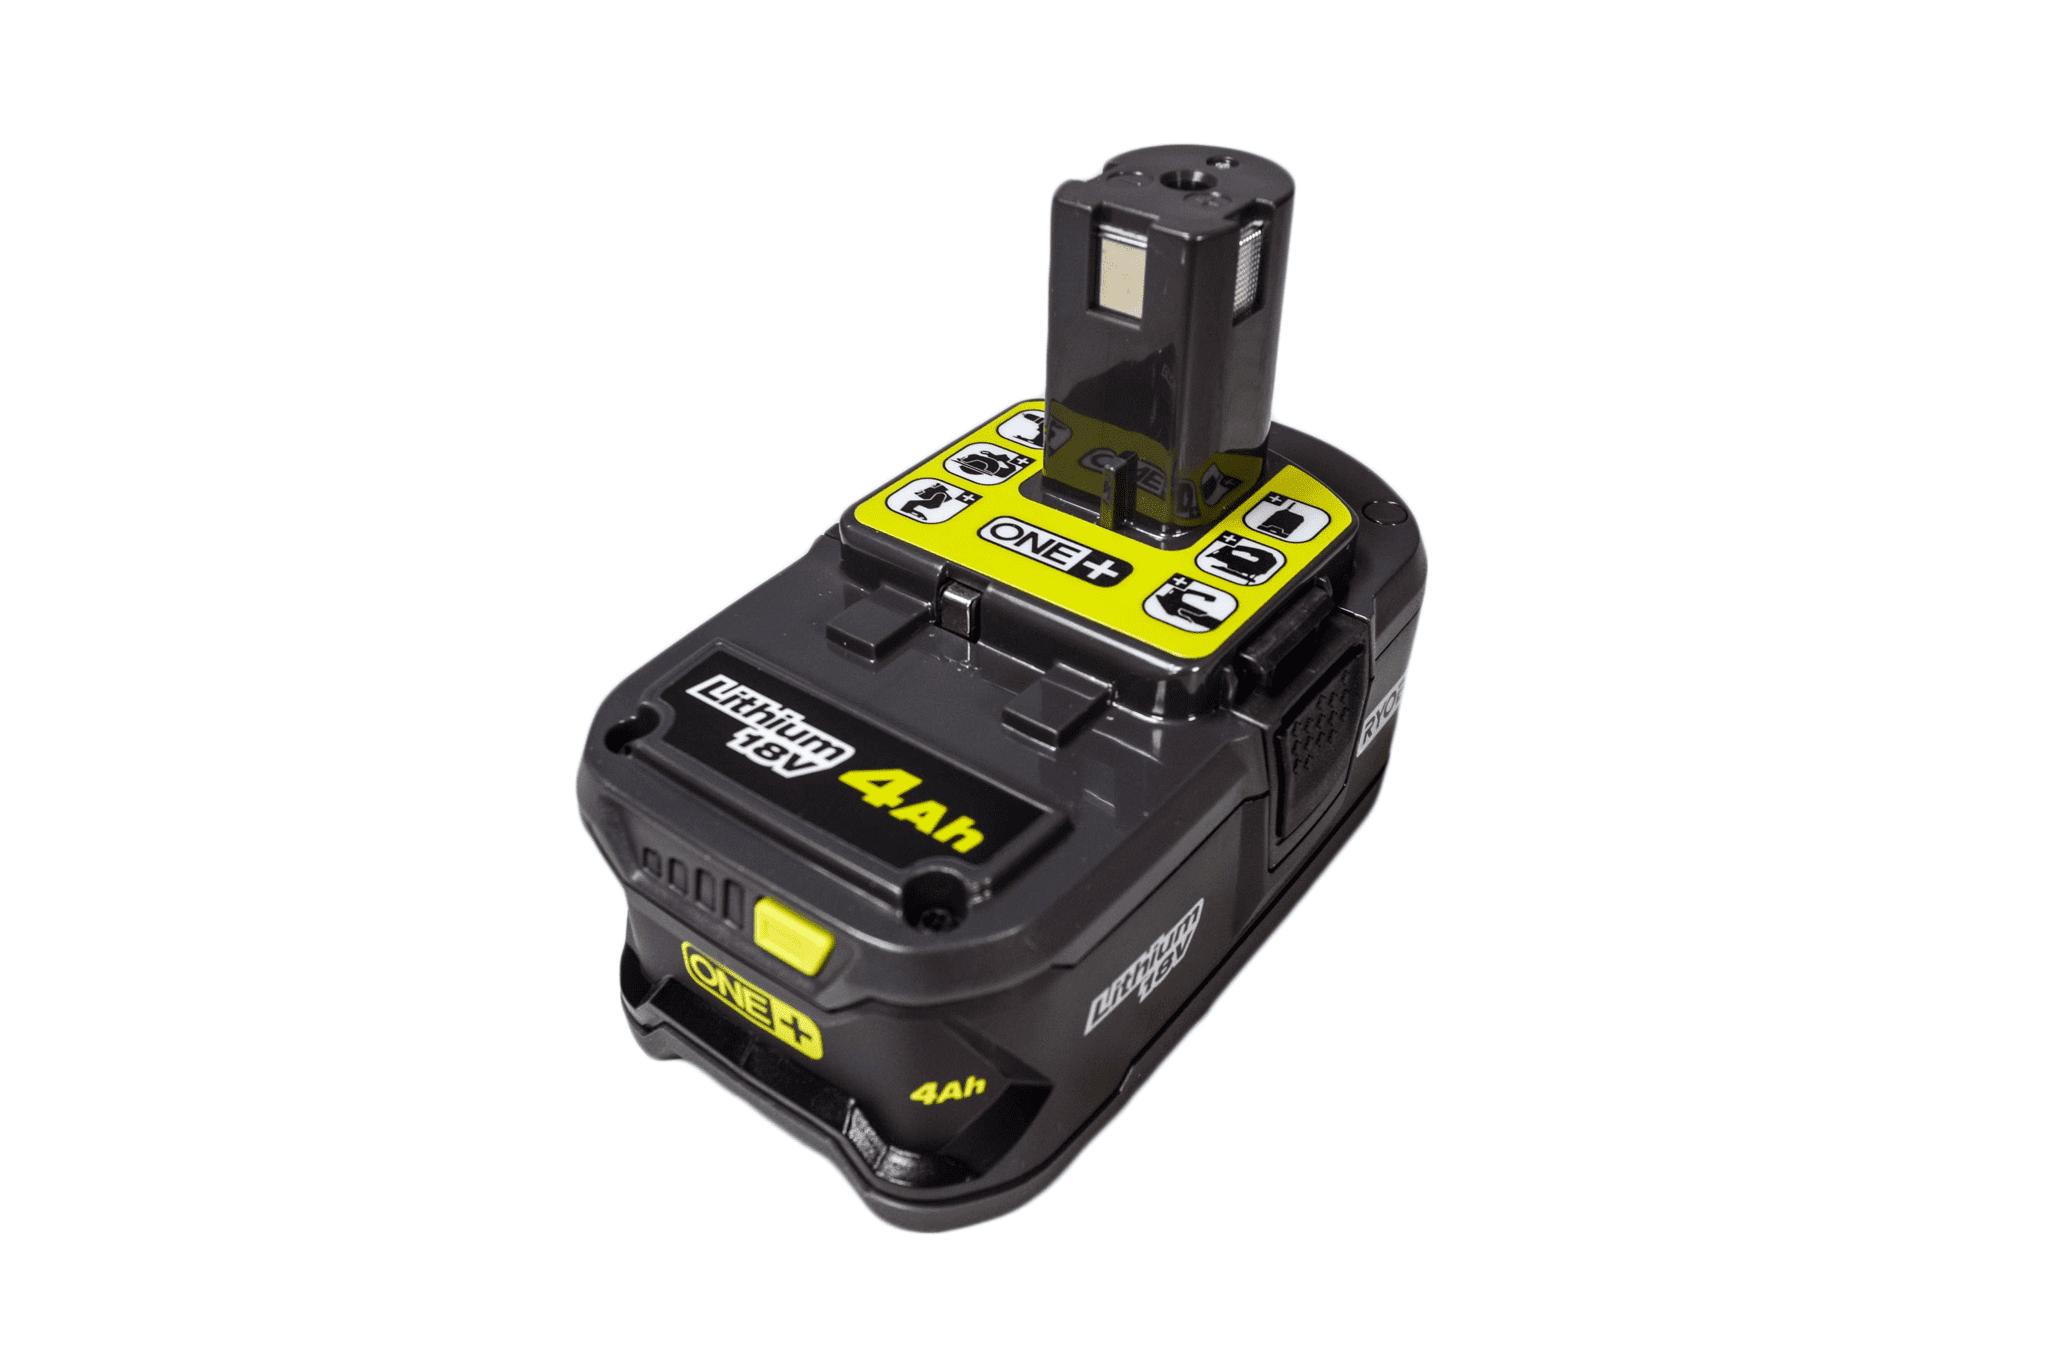 4.0Ah Lithium-ion Battery Pack for sale online Ryobi P197 18V ONE 